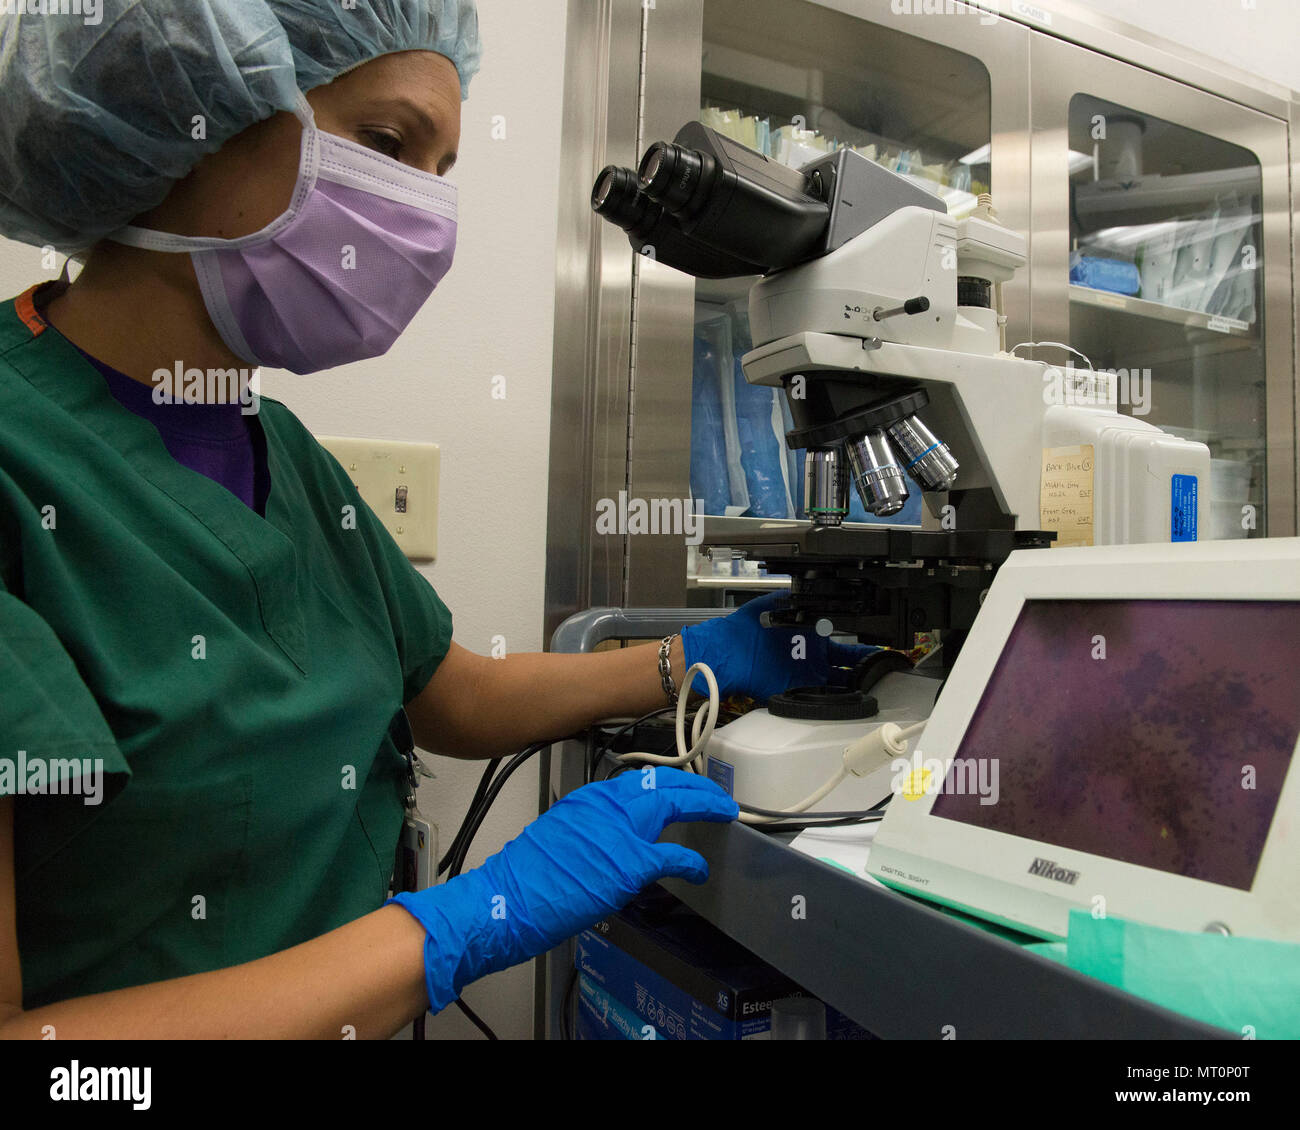 U.S. Air Force Maj. (Dr.) Luisa Watts, 88th Diagnostics and Therapeutic Squadron pathologist, examines a tissue sample of a patient’s endobronchial fine needle aspirate inside the operating room at Wright-Patterson Air Force Base Medical Center, June 26, 2017. Watts examines the tissue sample under the microscope to make a diagnosis of the patient’s condition.  (U.S. Air Force photo by Michelle Gigante/Released) Stock Photo